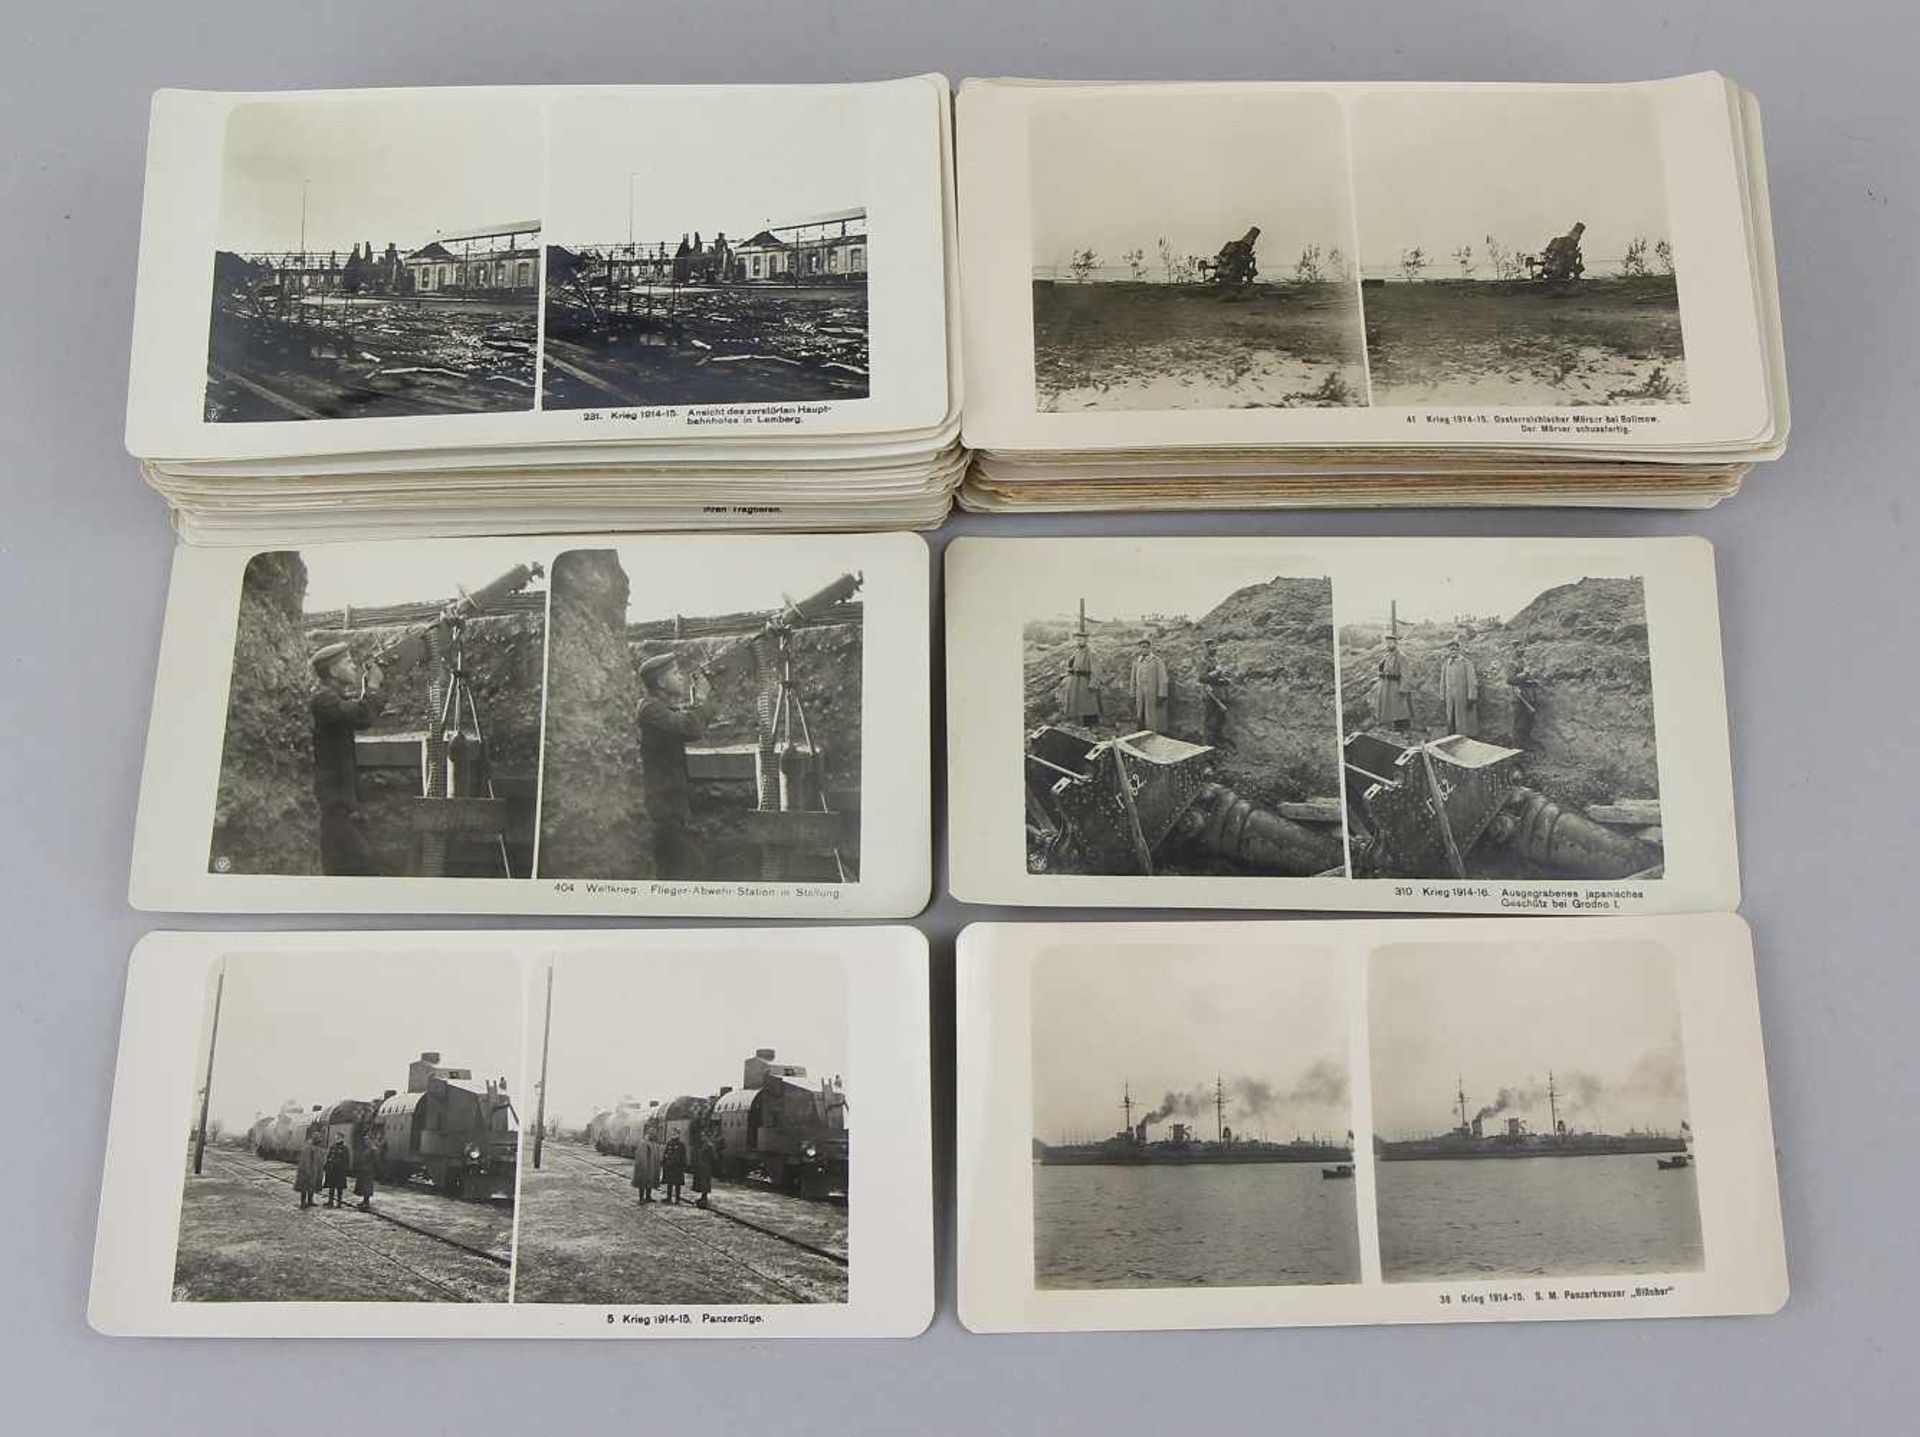 Large Bundle of 150 Stereoscopic Cards "World War 1914 - 1918"